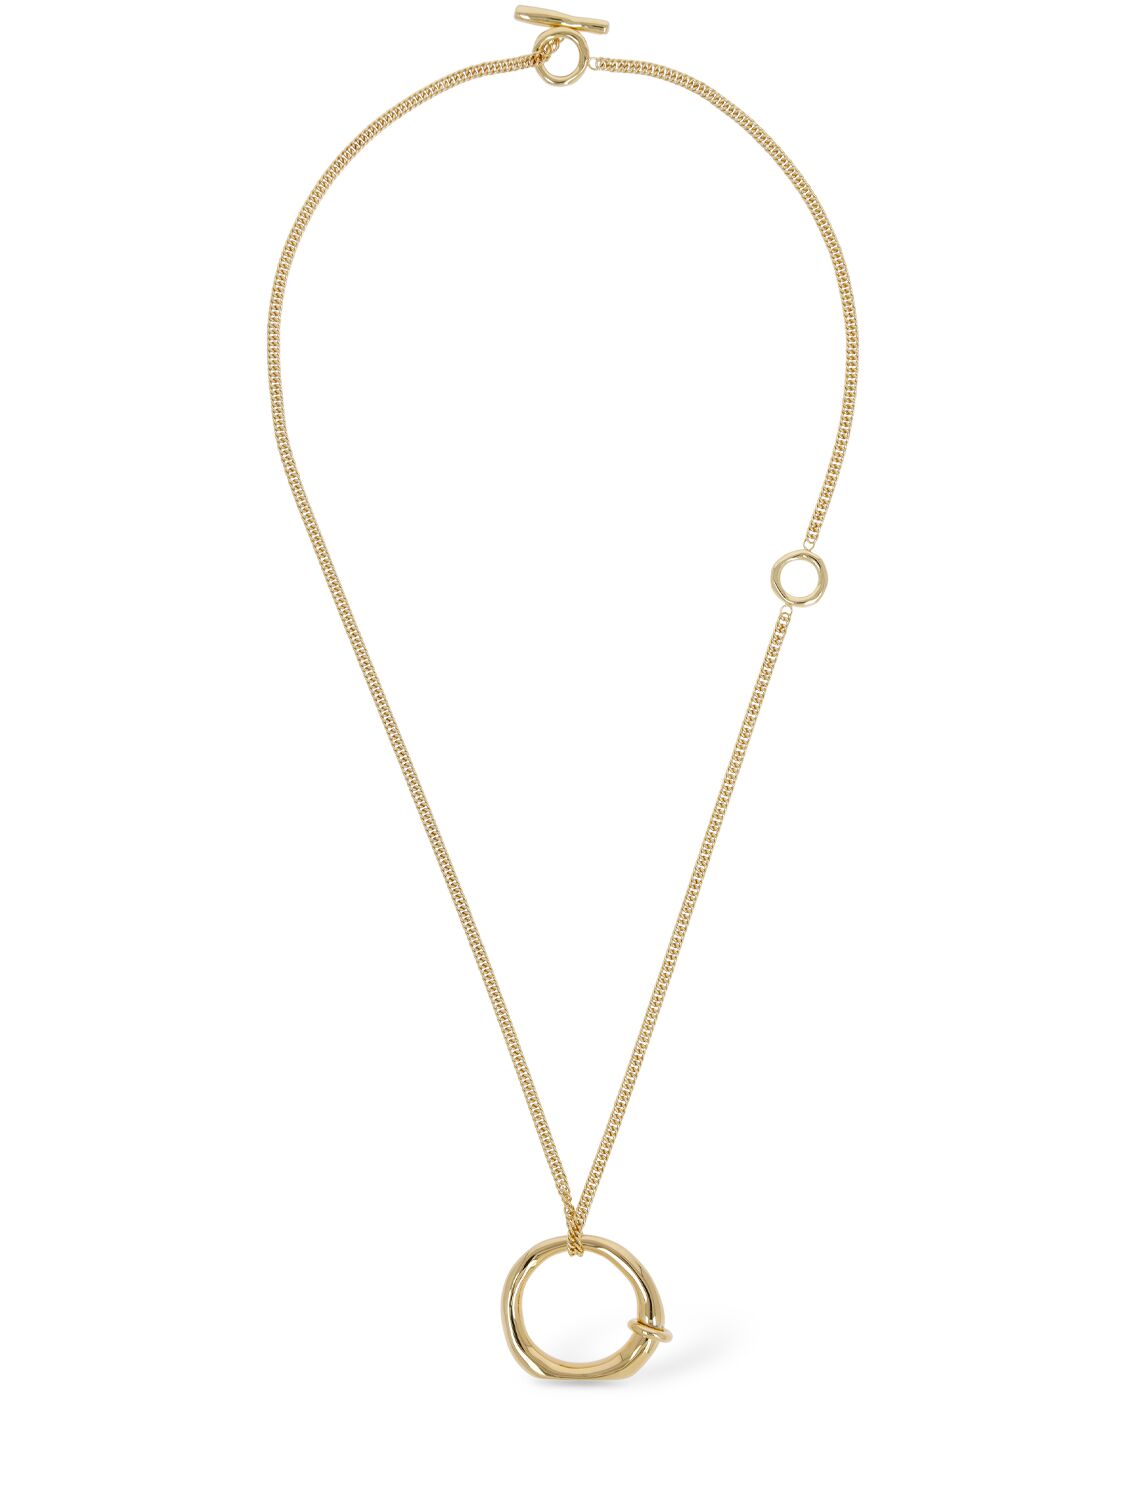 Jil Sander Bw9 2 Charm Collar Necklace In Gold